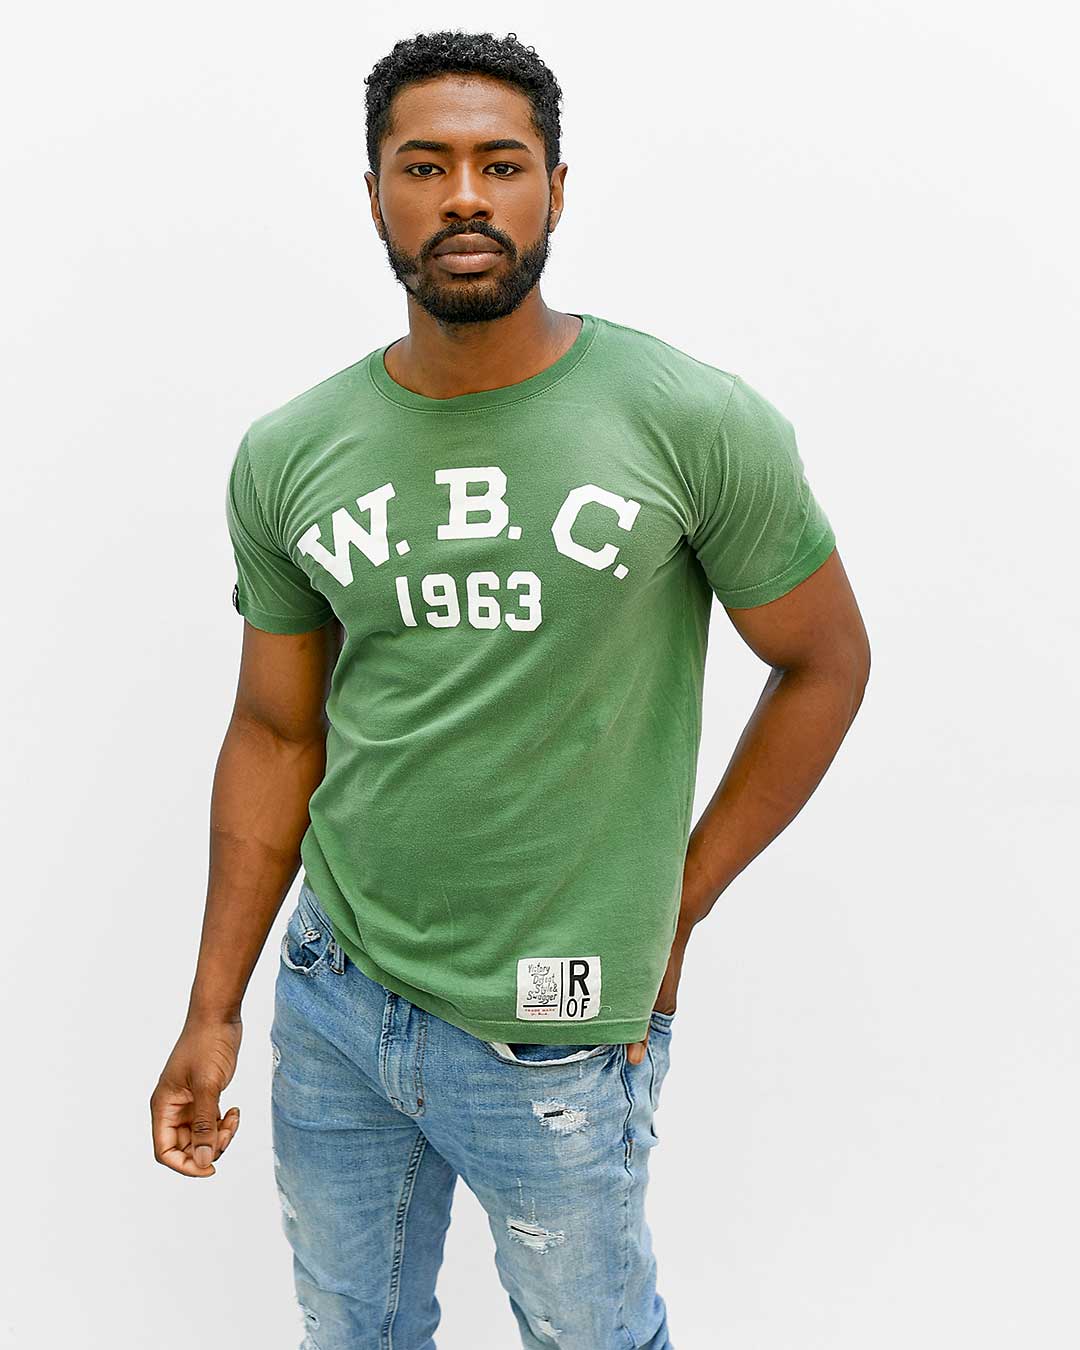 WBC 1963 Hope & Glory Green Tee - Roots of Fight